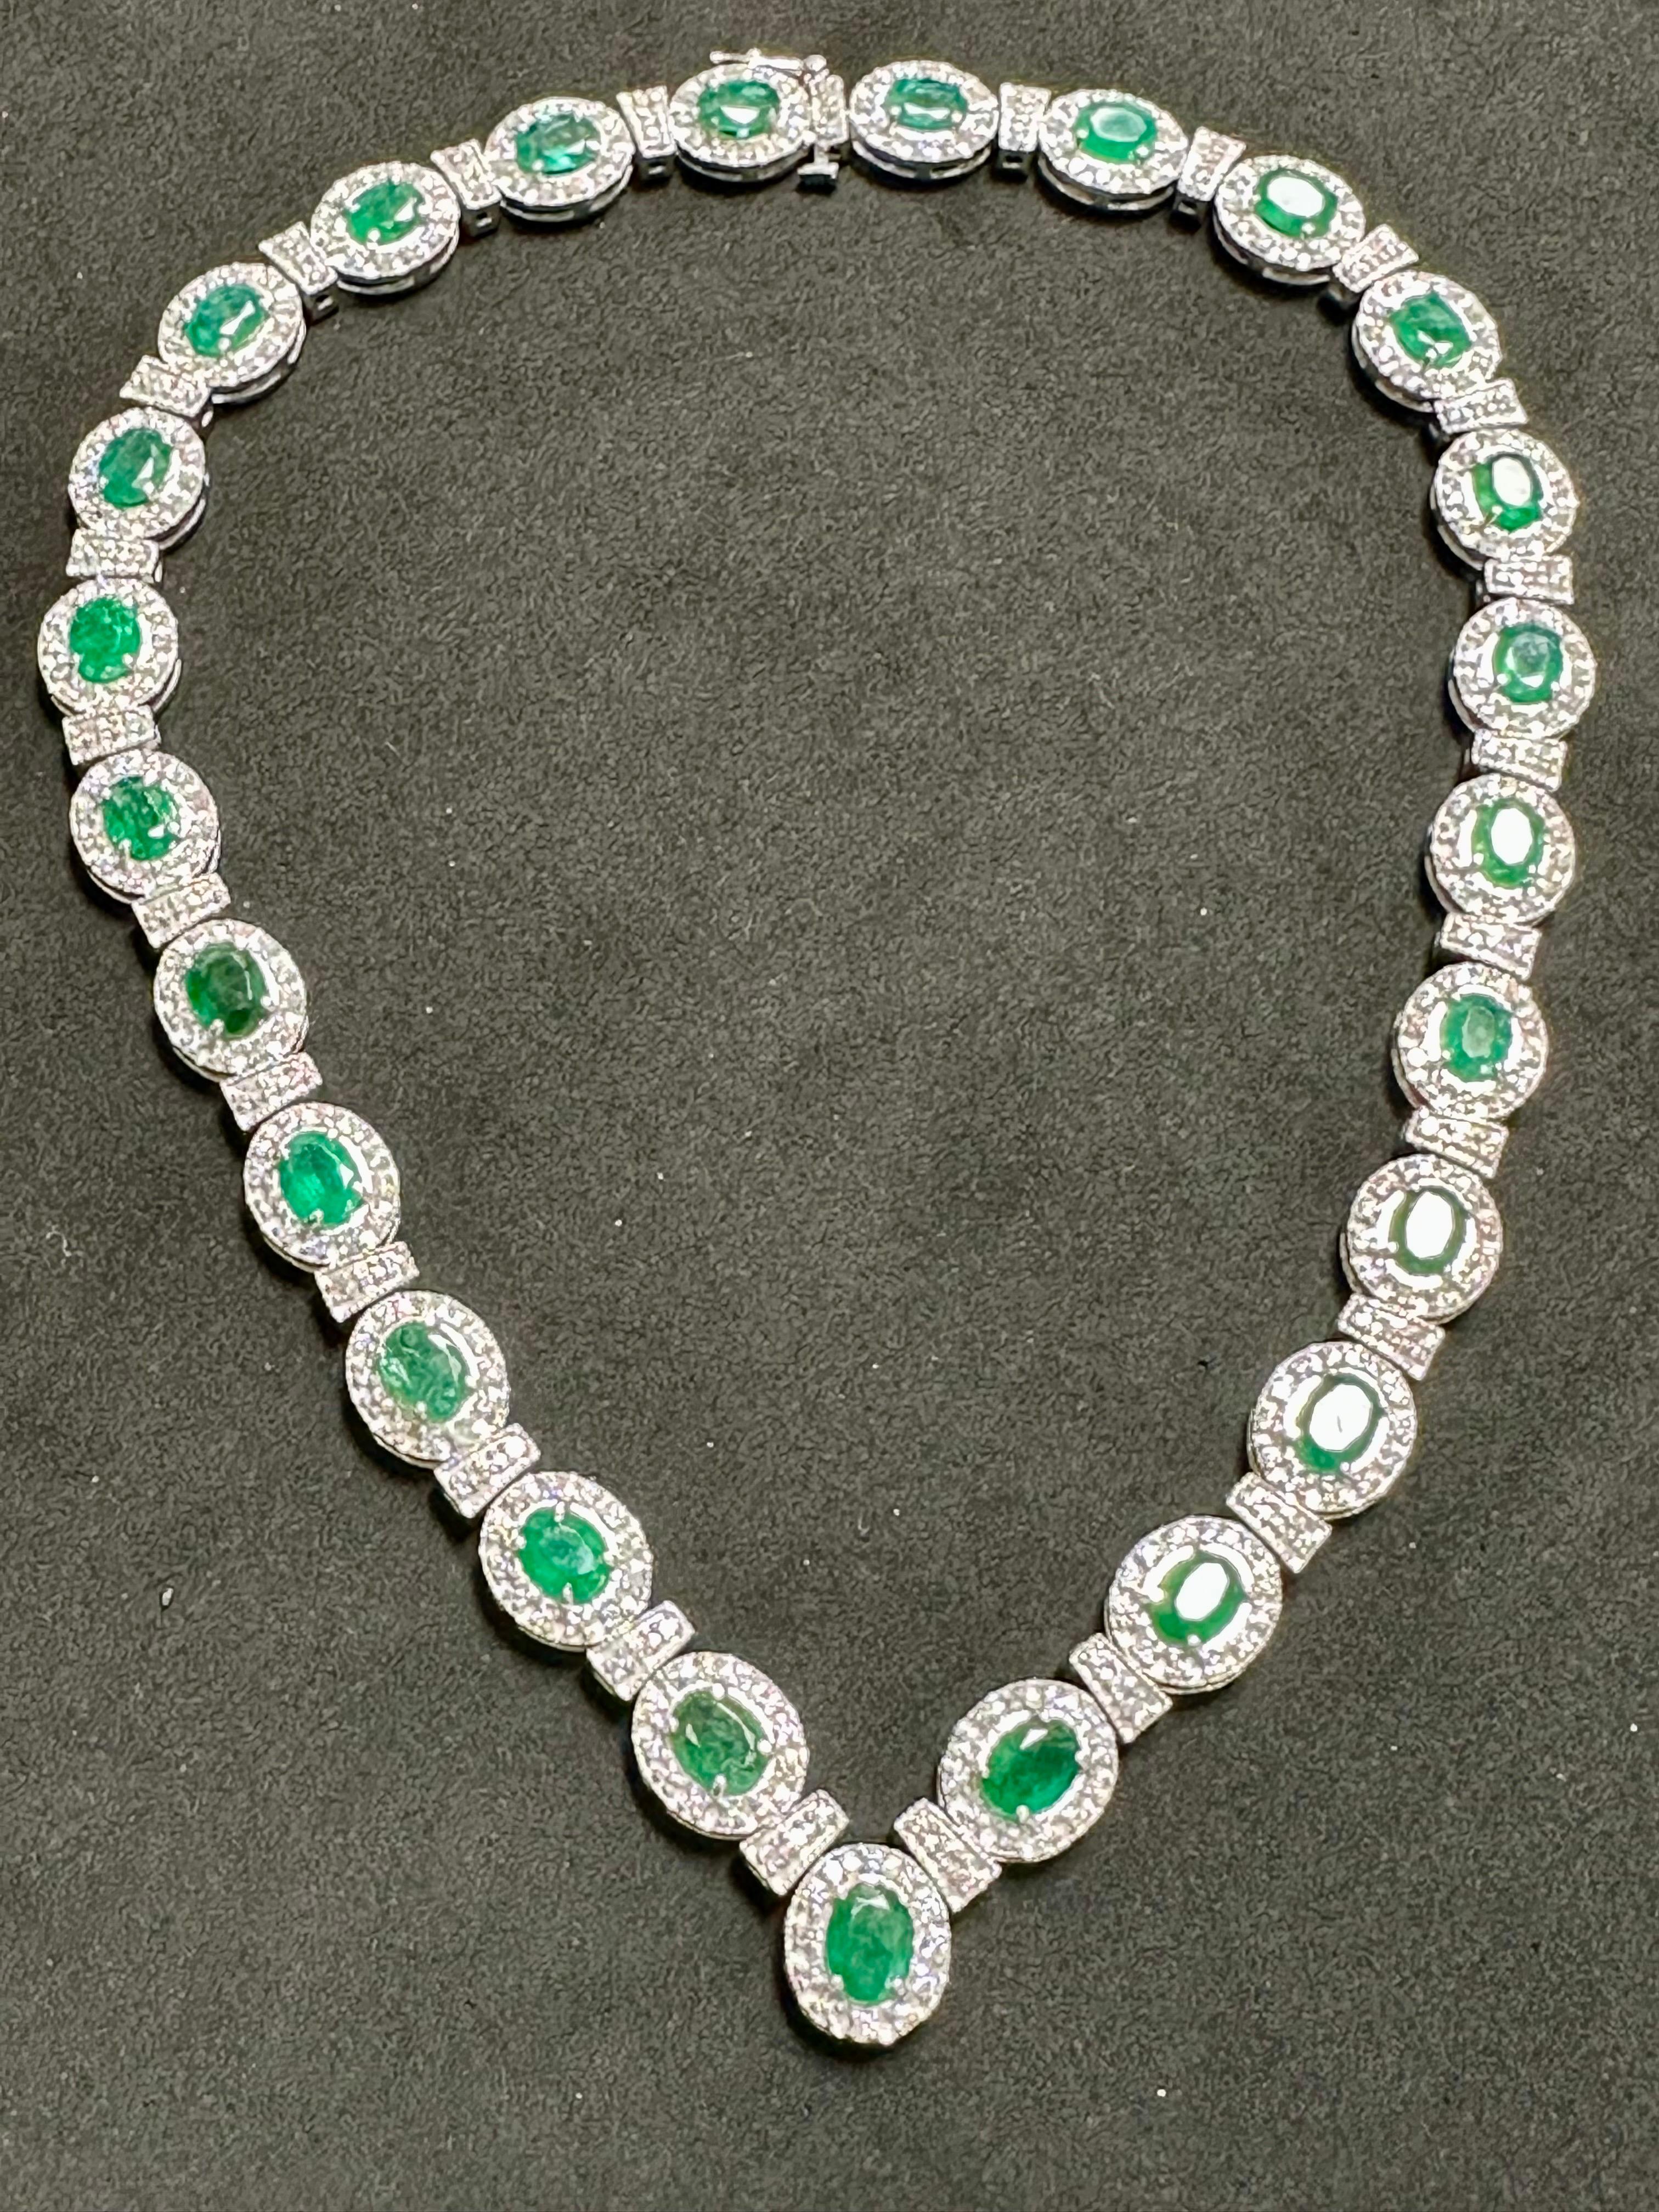 28 Carat Oval Shape Natural Emerald & 5 Carat Diamond Necklace in 14 Karat Gold
This spectacular Bridal  Necklace  consisting of 25 oval shape emeralds , each emerald approximately 1 to 1.10 Carat Each.
 Oval emerald is surrounded by brilliant cut